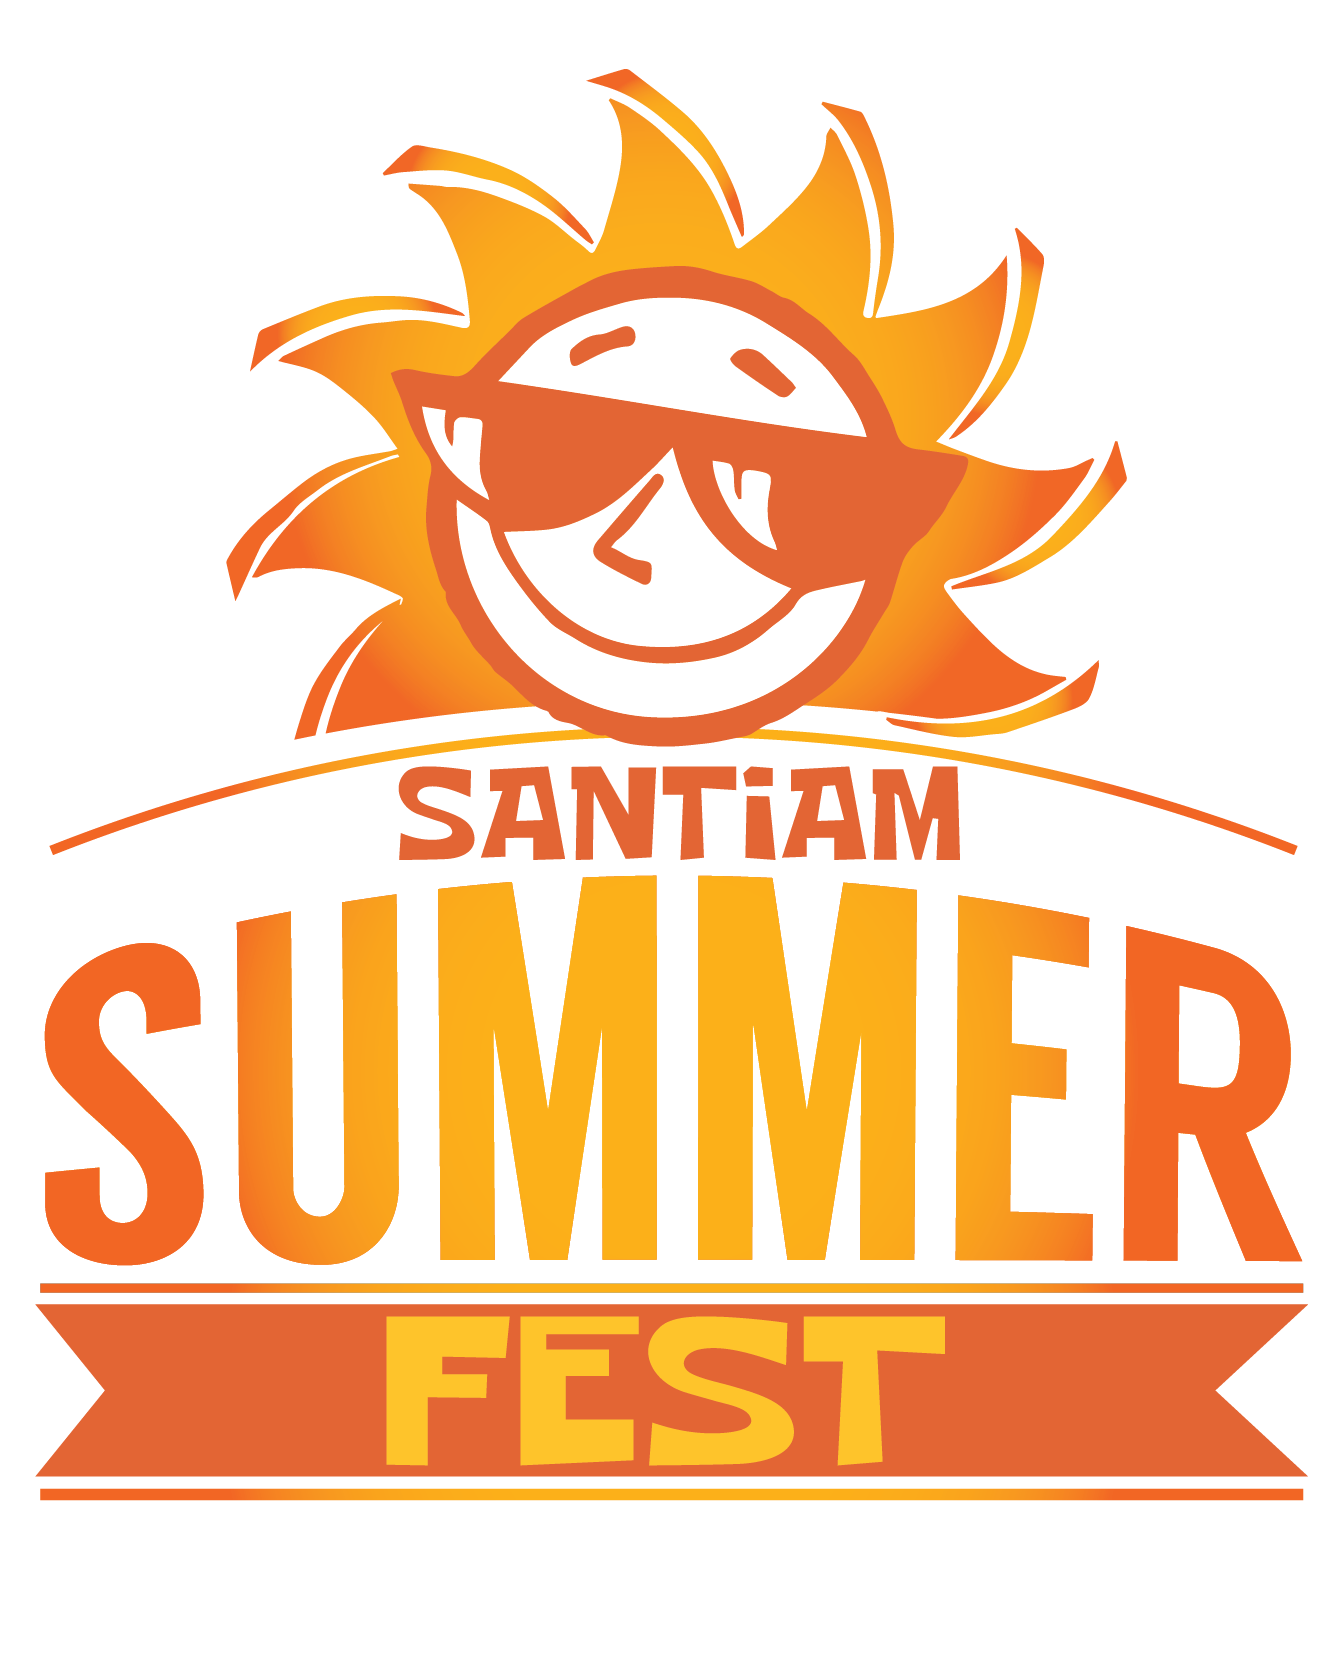 an orange and yellow logo with a big smiling sun wearing sunglasses at top and the the words Santiam Summer Fest below.